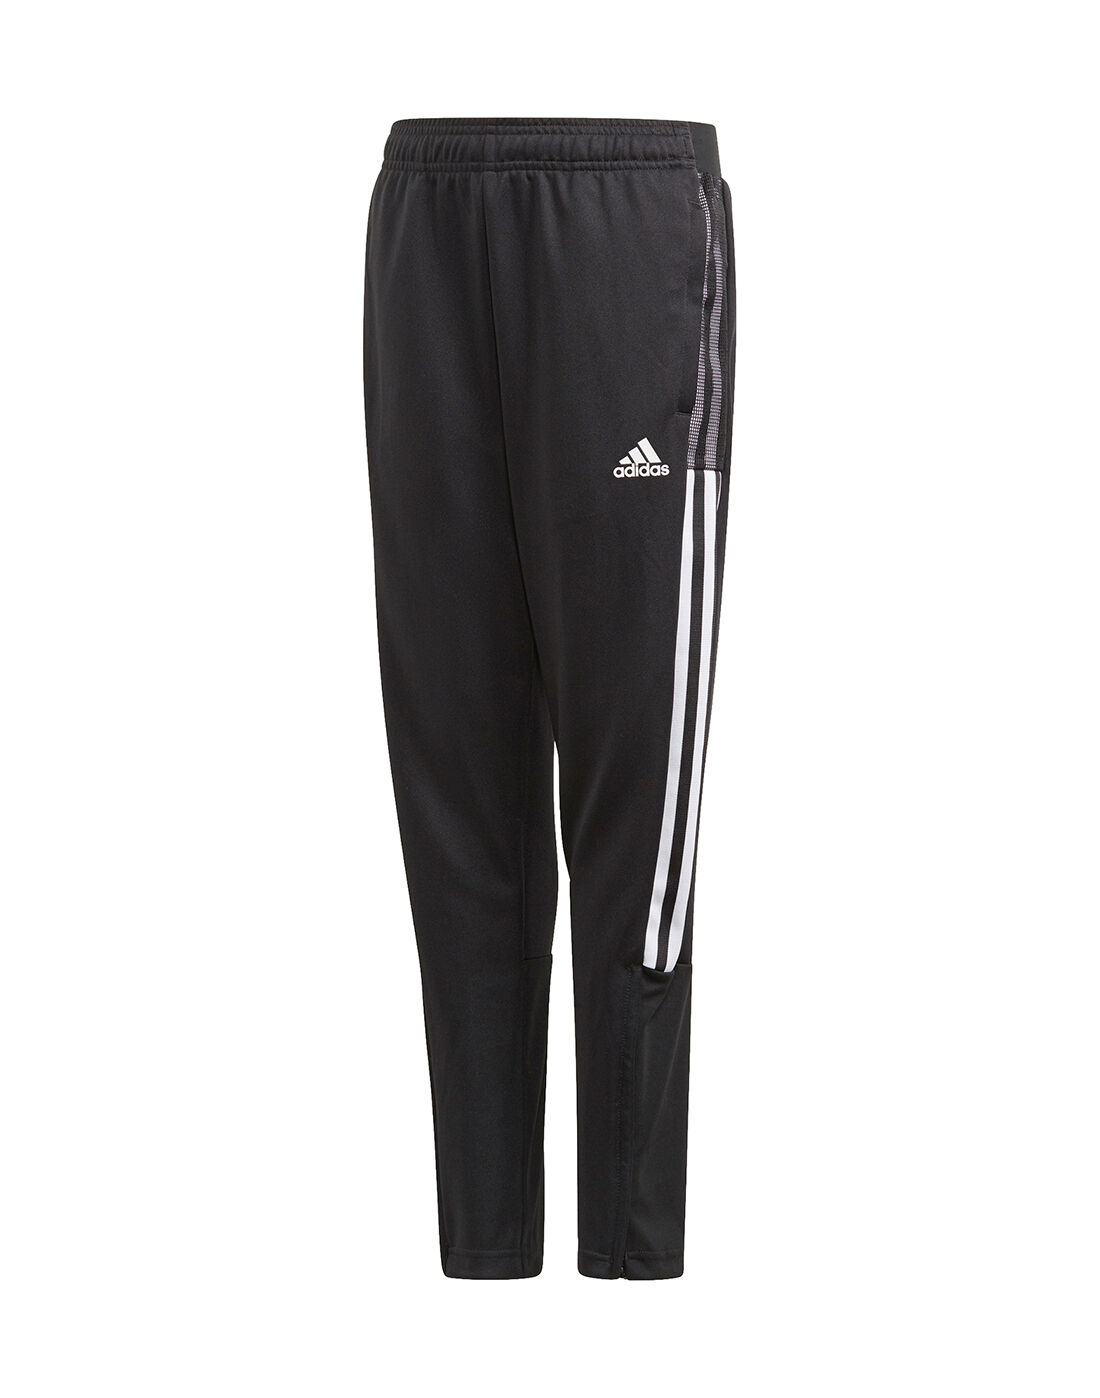 adidas pants with converse